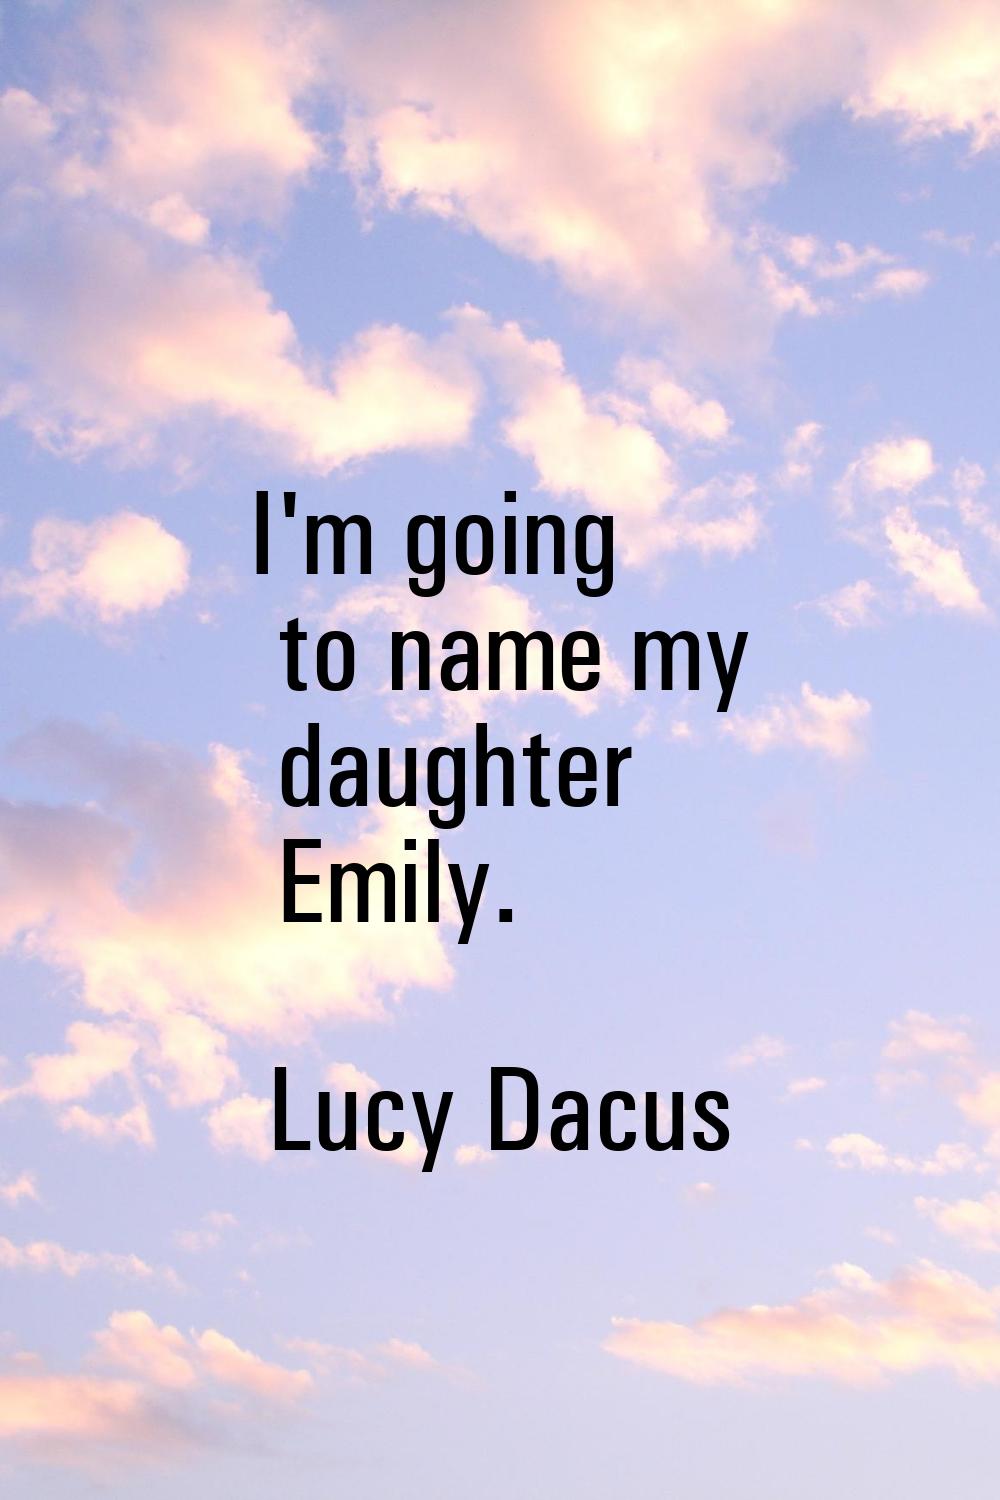 I'm going to name my daughter Emily.